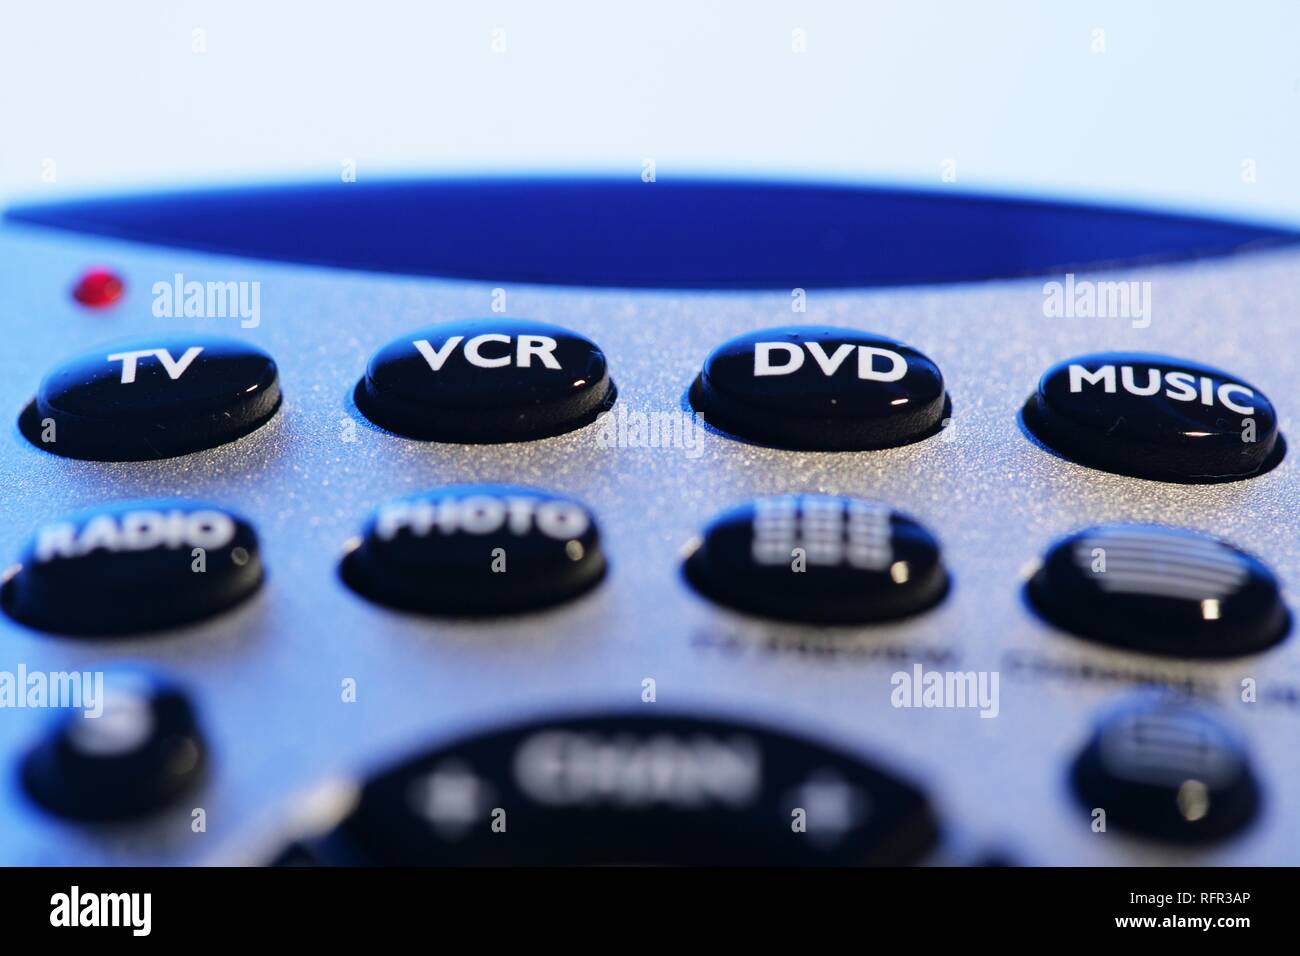 Remote control for TV, DVD and VCR player, radio, music Stock Photo